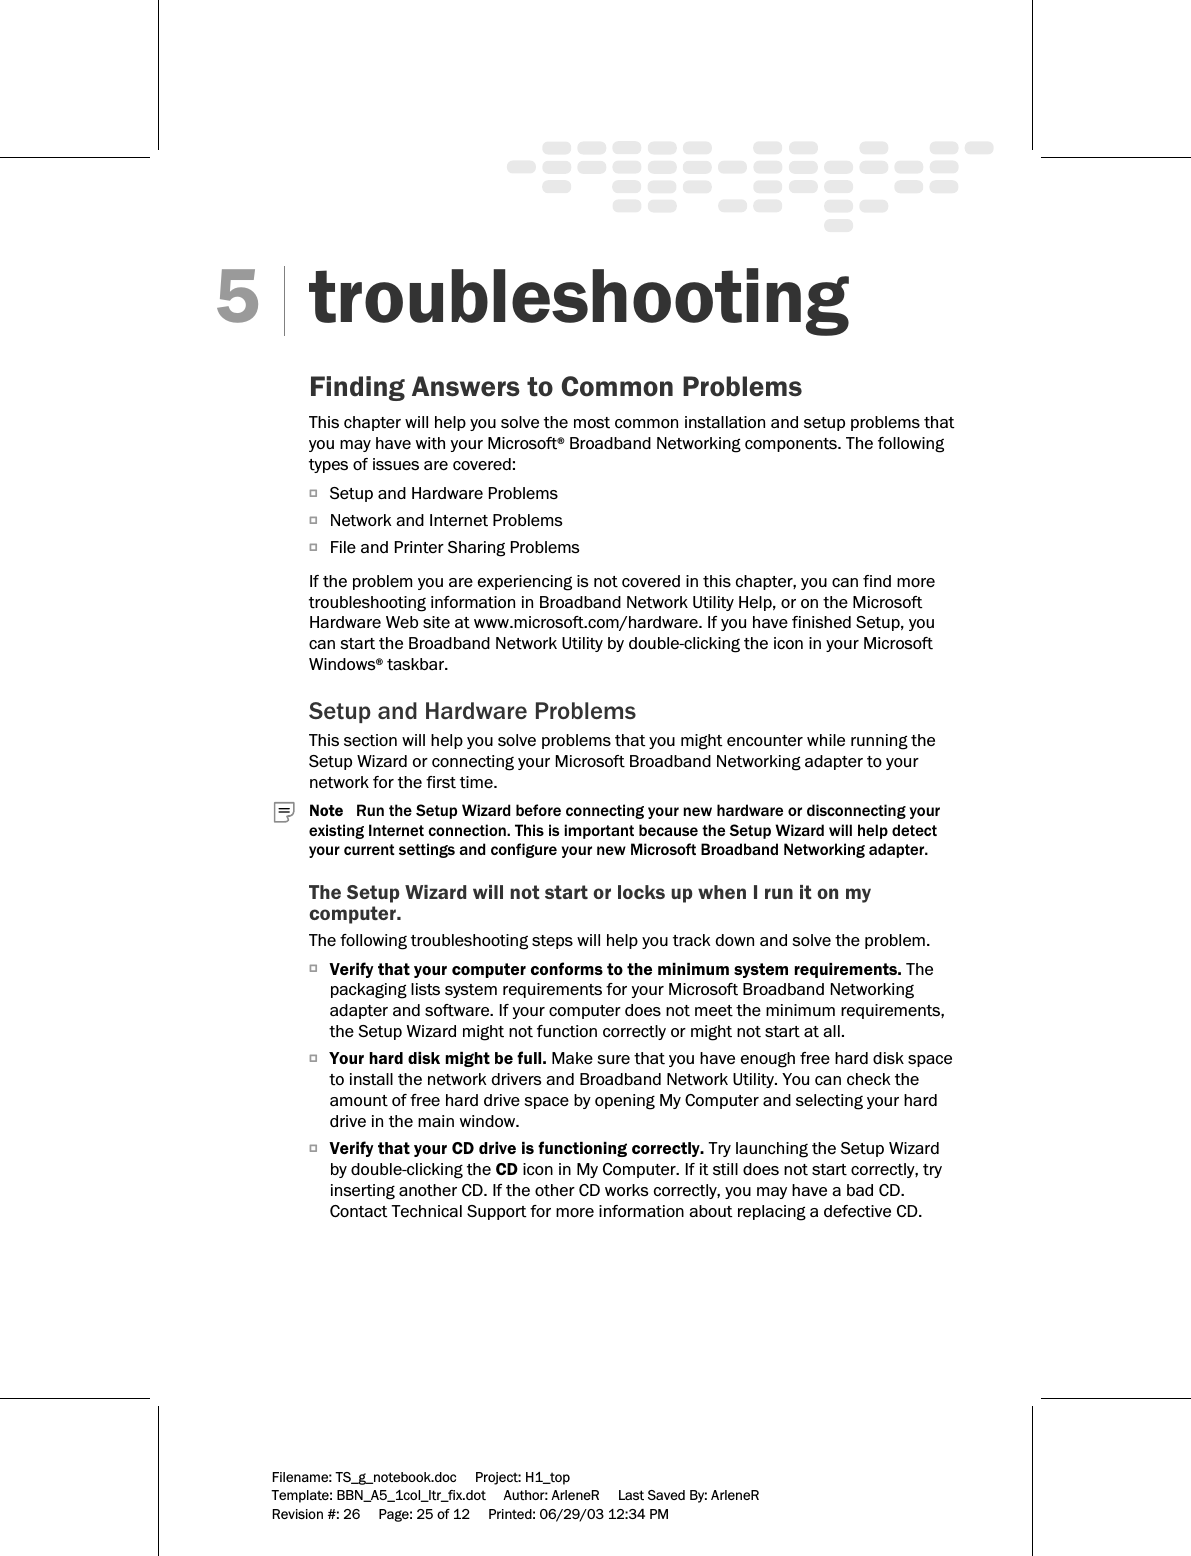     Filename: TS_g_notebook.doc     Project: H1_top    Template: BBN_A5_1col_ltr_fix.dot     Author: ArleneR     Last Saved By: ArleneR Revision #: 26     Page: 25 of 12     Printed: 06/29/03 12:34 PM   troubleshooting Finding Answers to Common Problems This chapter will help you solve the most common installation and setup problems that you may have with your Microsoft® Broadband Networking components. The following types of issues are covered: OSetup and Hardware Problems ONetwork and Internet Problems OFile and Printer Sharing Problems  If the problem you are experiencing is not covered in this chapter, you can find more troubleshooting information in Broadband Network Utility Help, or on the Microsoft Hardware Web site at www.microsoft.com/hardware. If you have finished Setup, you can start the Broadband Network Utility by double-clicking the icon in your Microsoft Windows® taskbar. Setup and Hardware Problems This section will help you solve problems that you might encounter while running the Setup Wizard or connecting your Microsoft Broadband Networking adapter to your network for the first time.  Note   Run the Setup Wizard before connecting your new hardware or disconnecting your existing Internet connection. This is important because the Setup Wizard will help detect your current settings and configure your new Microsoft Broadband Networking adapter. The Setup Wizard will not start or locks up when I run it on my computer. The following troubleshooting steps will help you track down and solve the problem. OVerify that your computer conforms to the minimum system requirements. The packaging lists system requirements for your Microsoft Broadband Networking adapter and software. If your computer does not meet the minimum requirements, the Setup Wizard might not function correctly or might not start at all.  OYour hard disk might be full. Make sure that you have enough free hard disk space to install the network drivers and Broadband Network Utility. You can check the amount of free hard drive space by opening My Computer and selecting your hard drive in the main window. OVerify that your CD drive is functioning correctly. Try launching the Setup Wizard by double-clicking the CD icon in My Computer. If it still does not start correctly, try inserting another CD. If the other CD works correctly, you may have a bad CD. Contact Technical Support for more information about replacing a defective CD.  5 